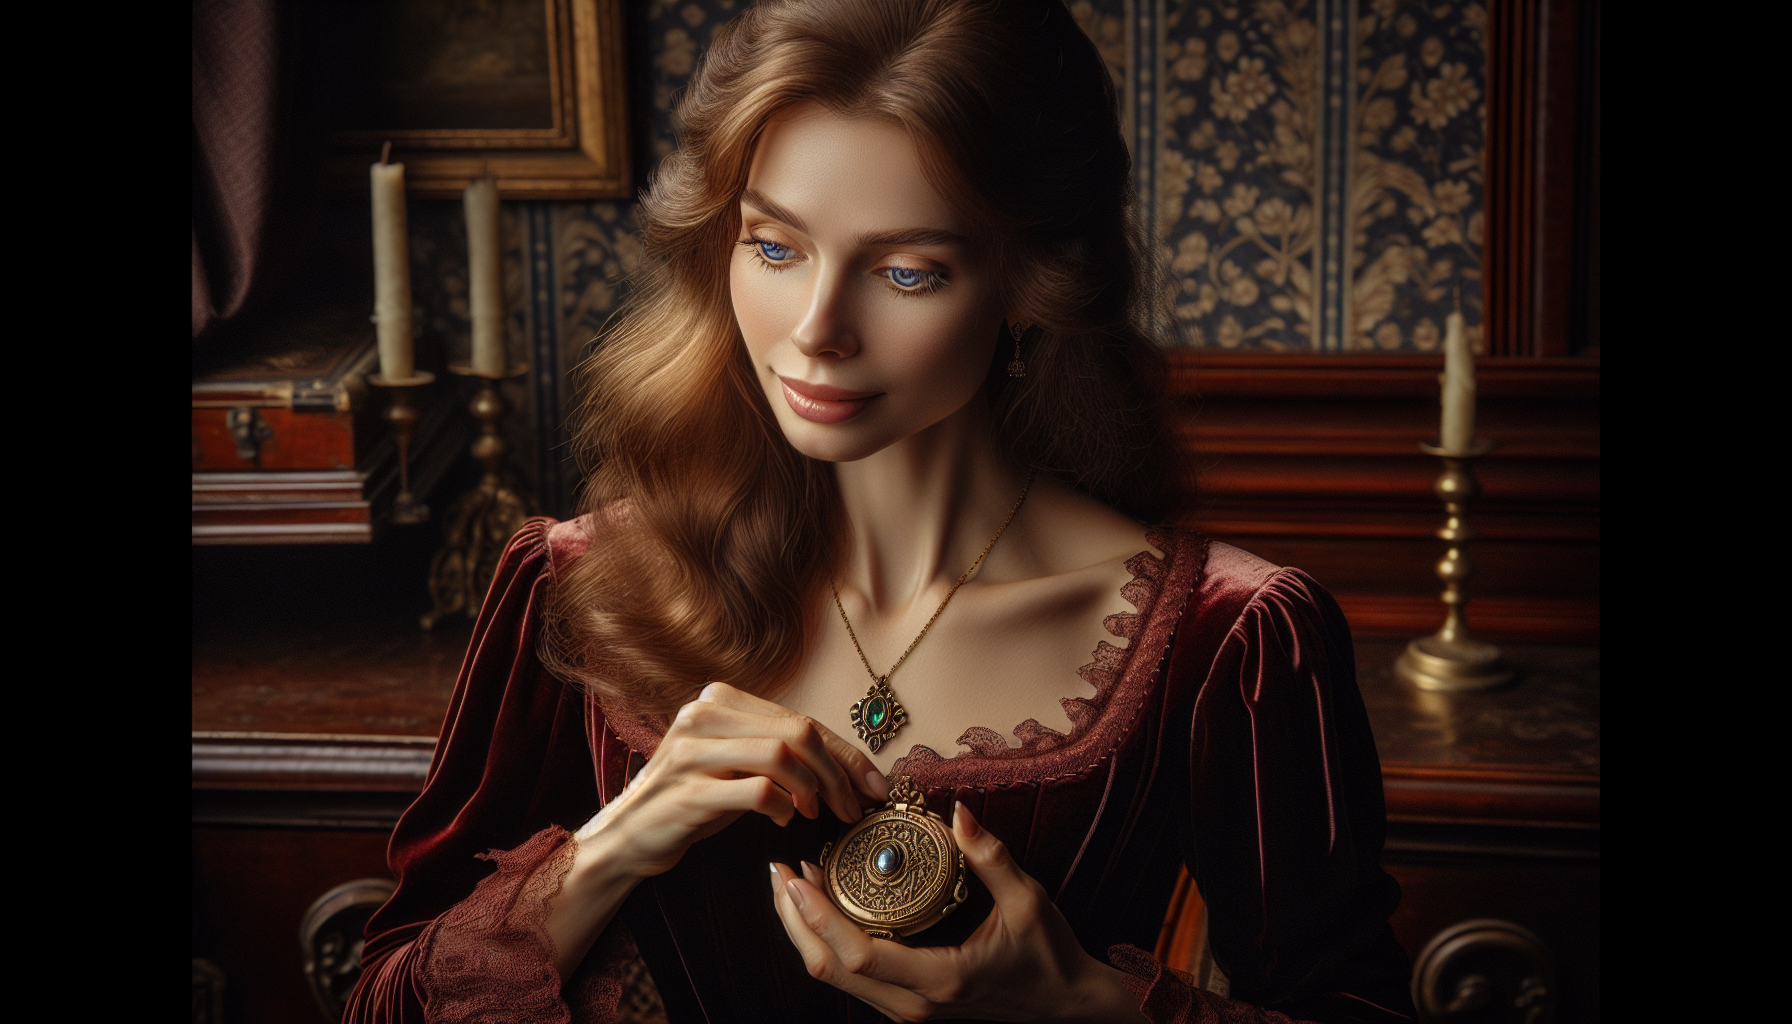 A detailed scene portraying a gentle, Caucasian woman with long chestnut hair in her early thirties. She's wearing a warm maroon velvet dress, seated in a vintage setting with a backdrop of mahogany f